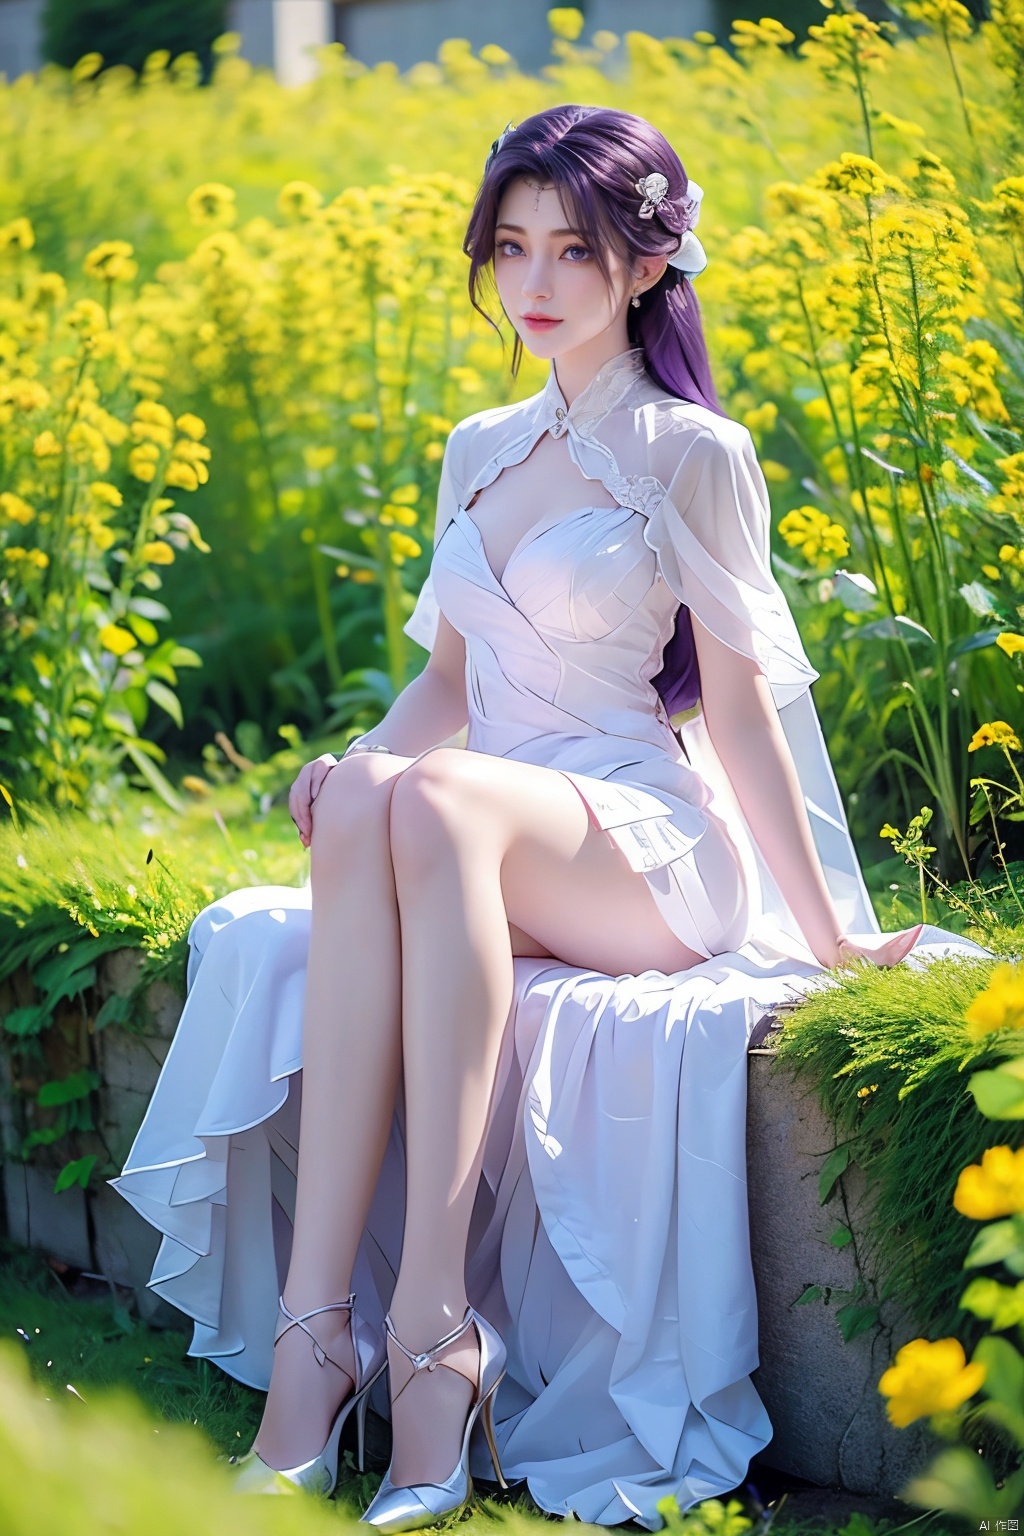 Purple pupil and purple hair, white dress, sitting in the flowers.Full-length high heels